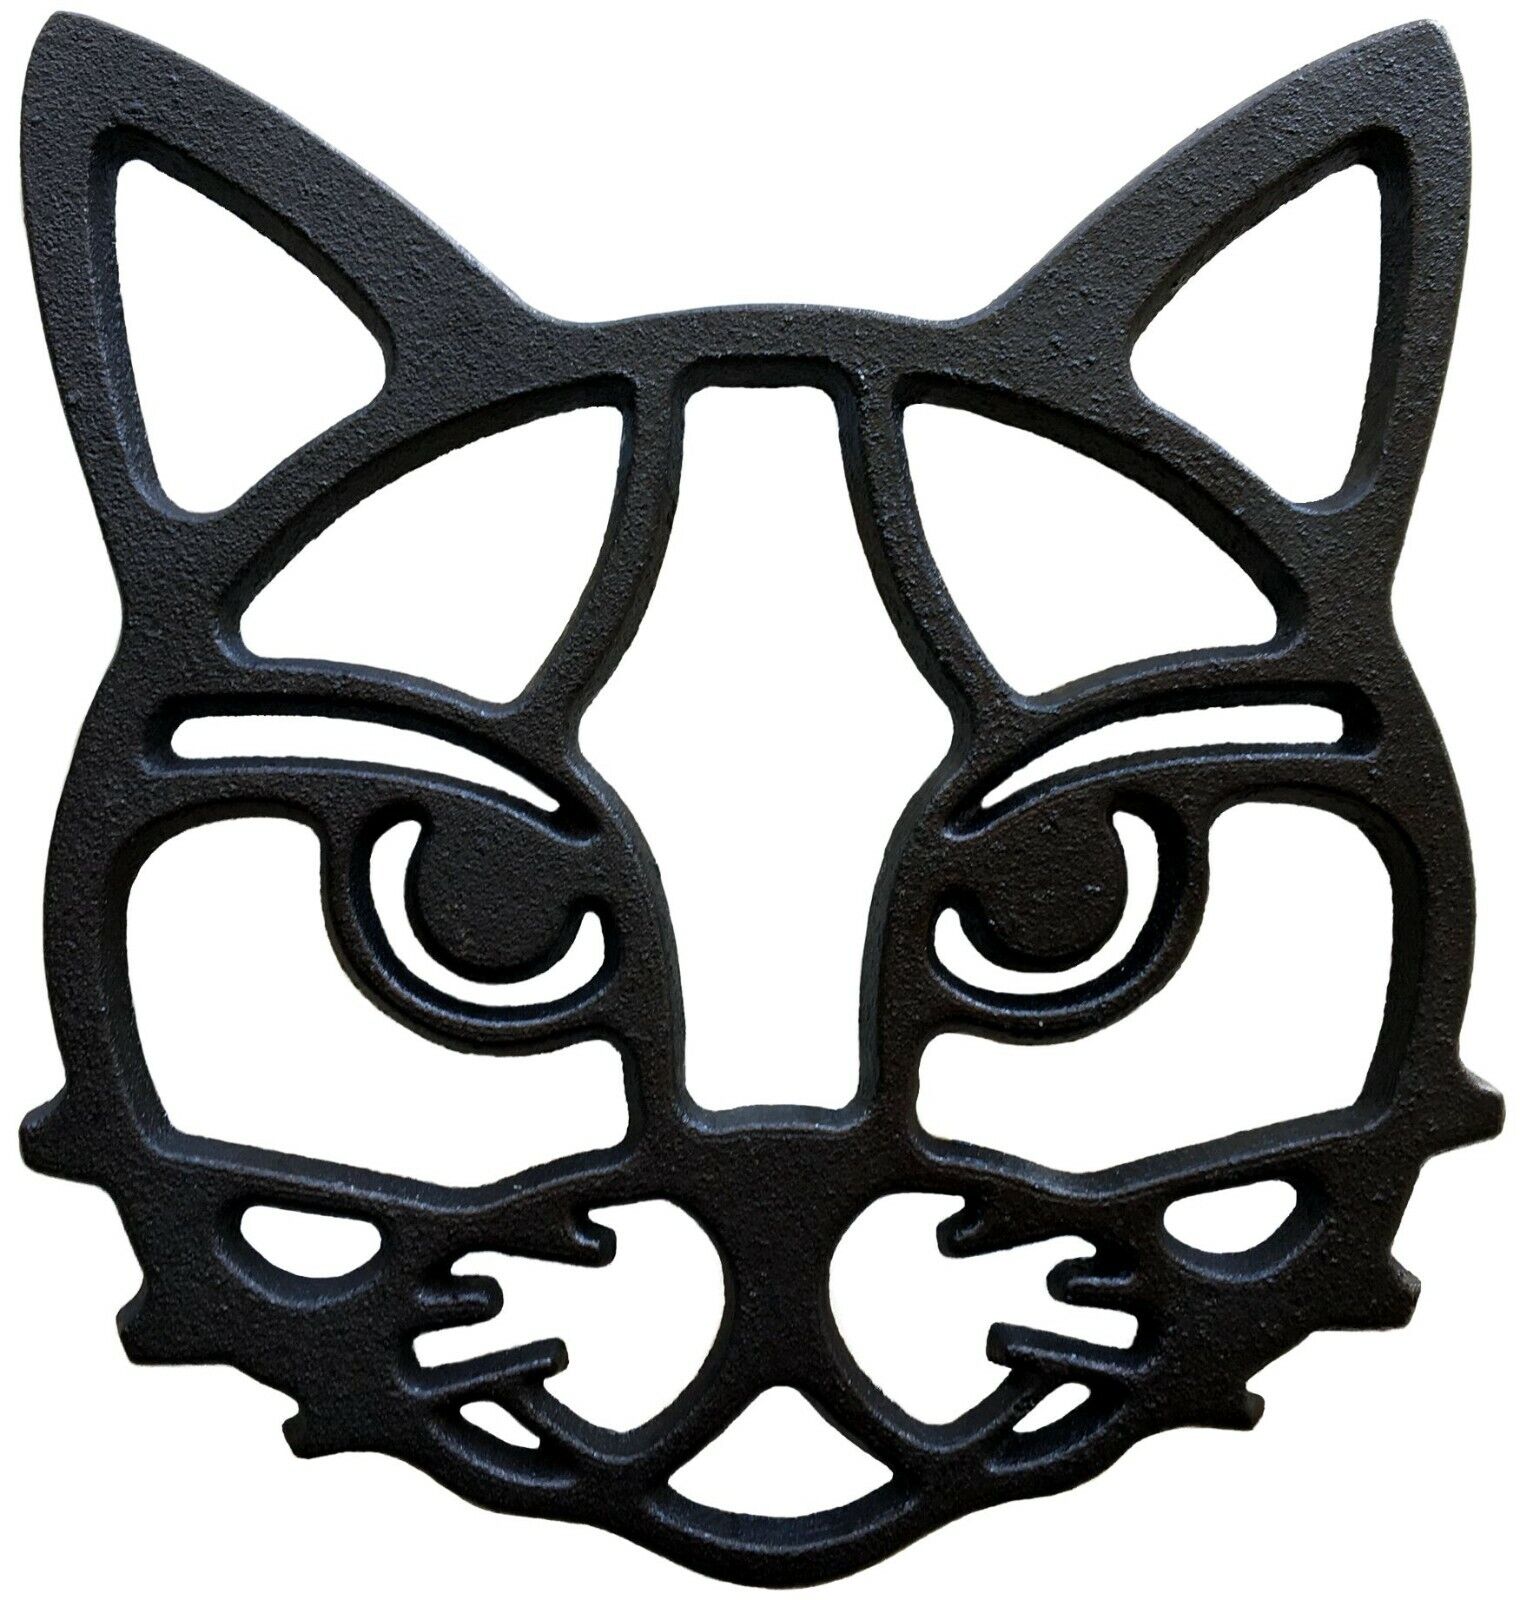 Cat Trivet - Black Cast Iron with feet - Kitchen & Dining Table - 6.5” x 6” NEW 